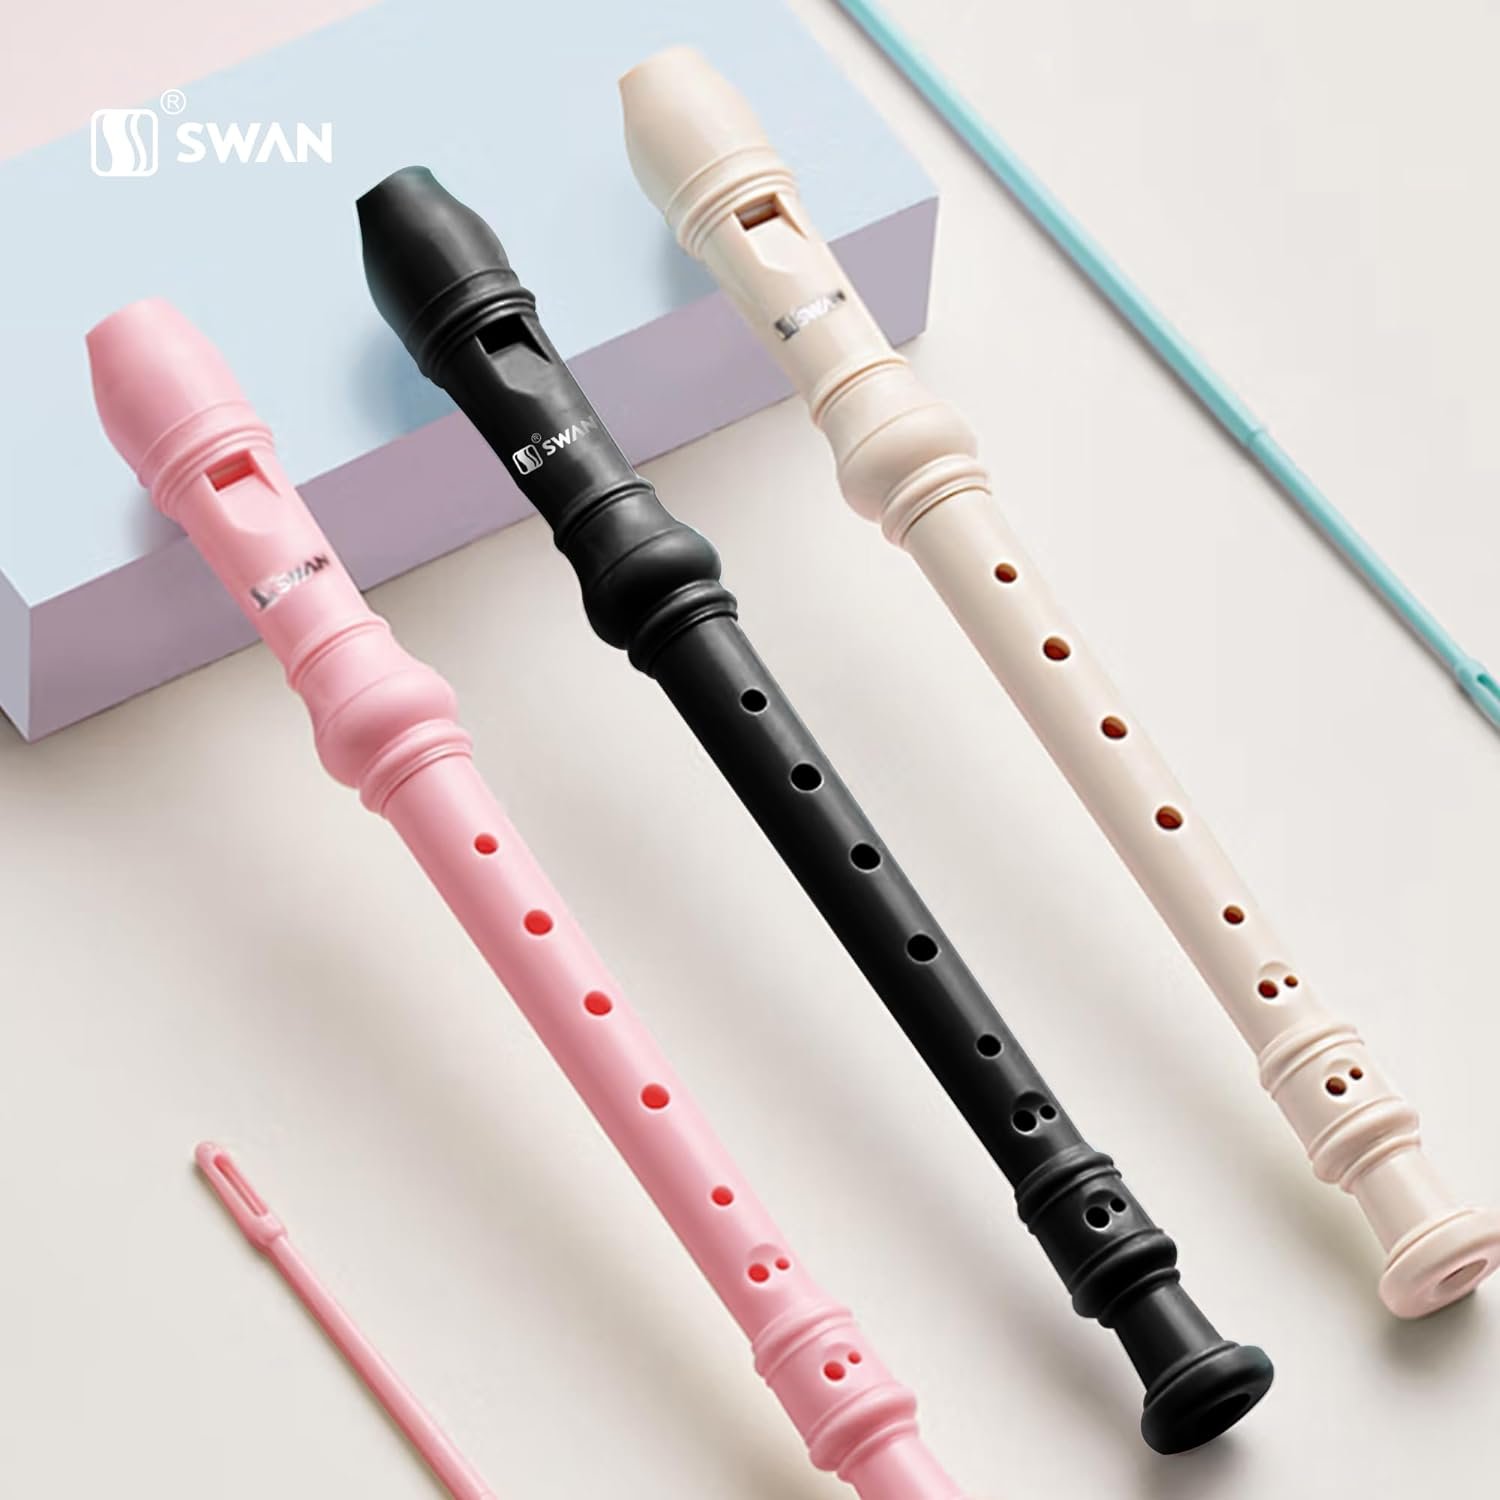 SWAN Soprano Recorder Instrument for Beginners Kids Student in School - German Fingering 8 Hole Flute 3pcs ABS Descant Recorders with Cleaning Rod and Fingering Chart, SW8K Black